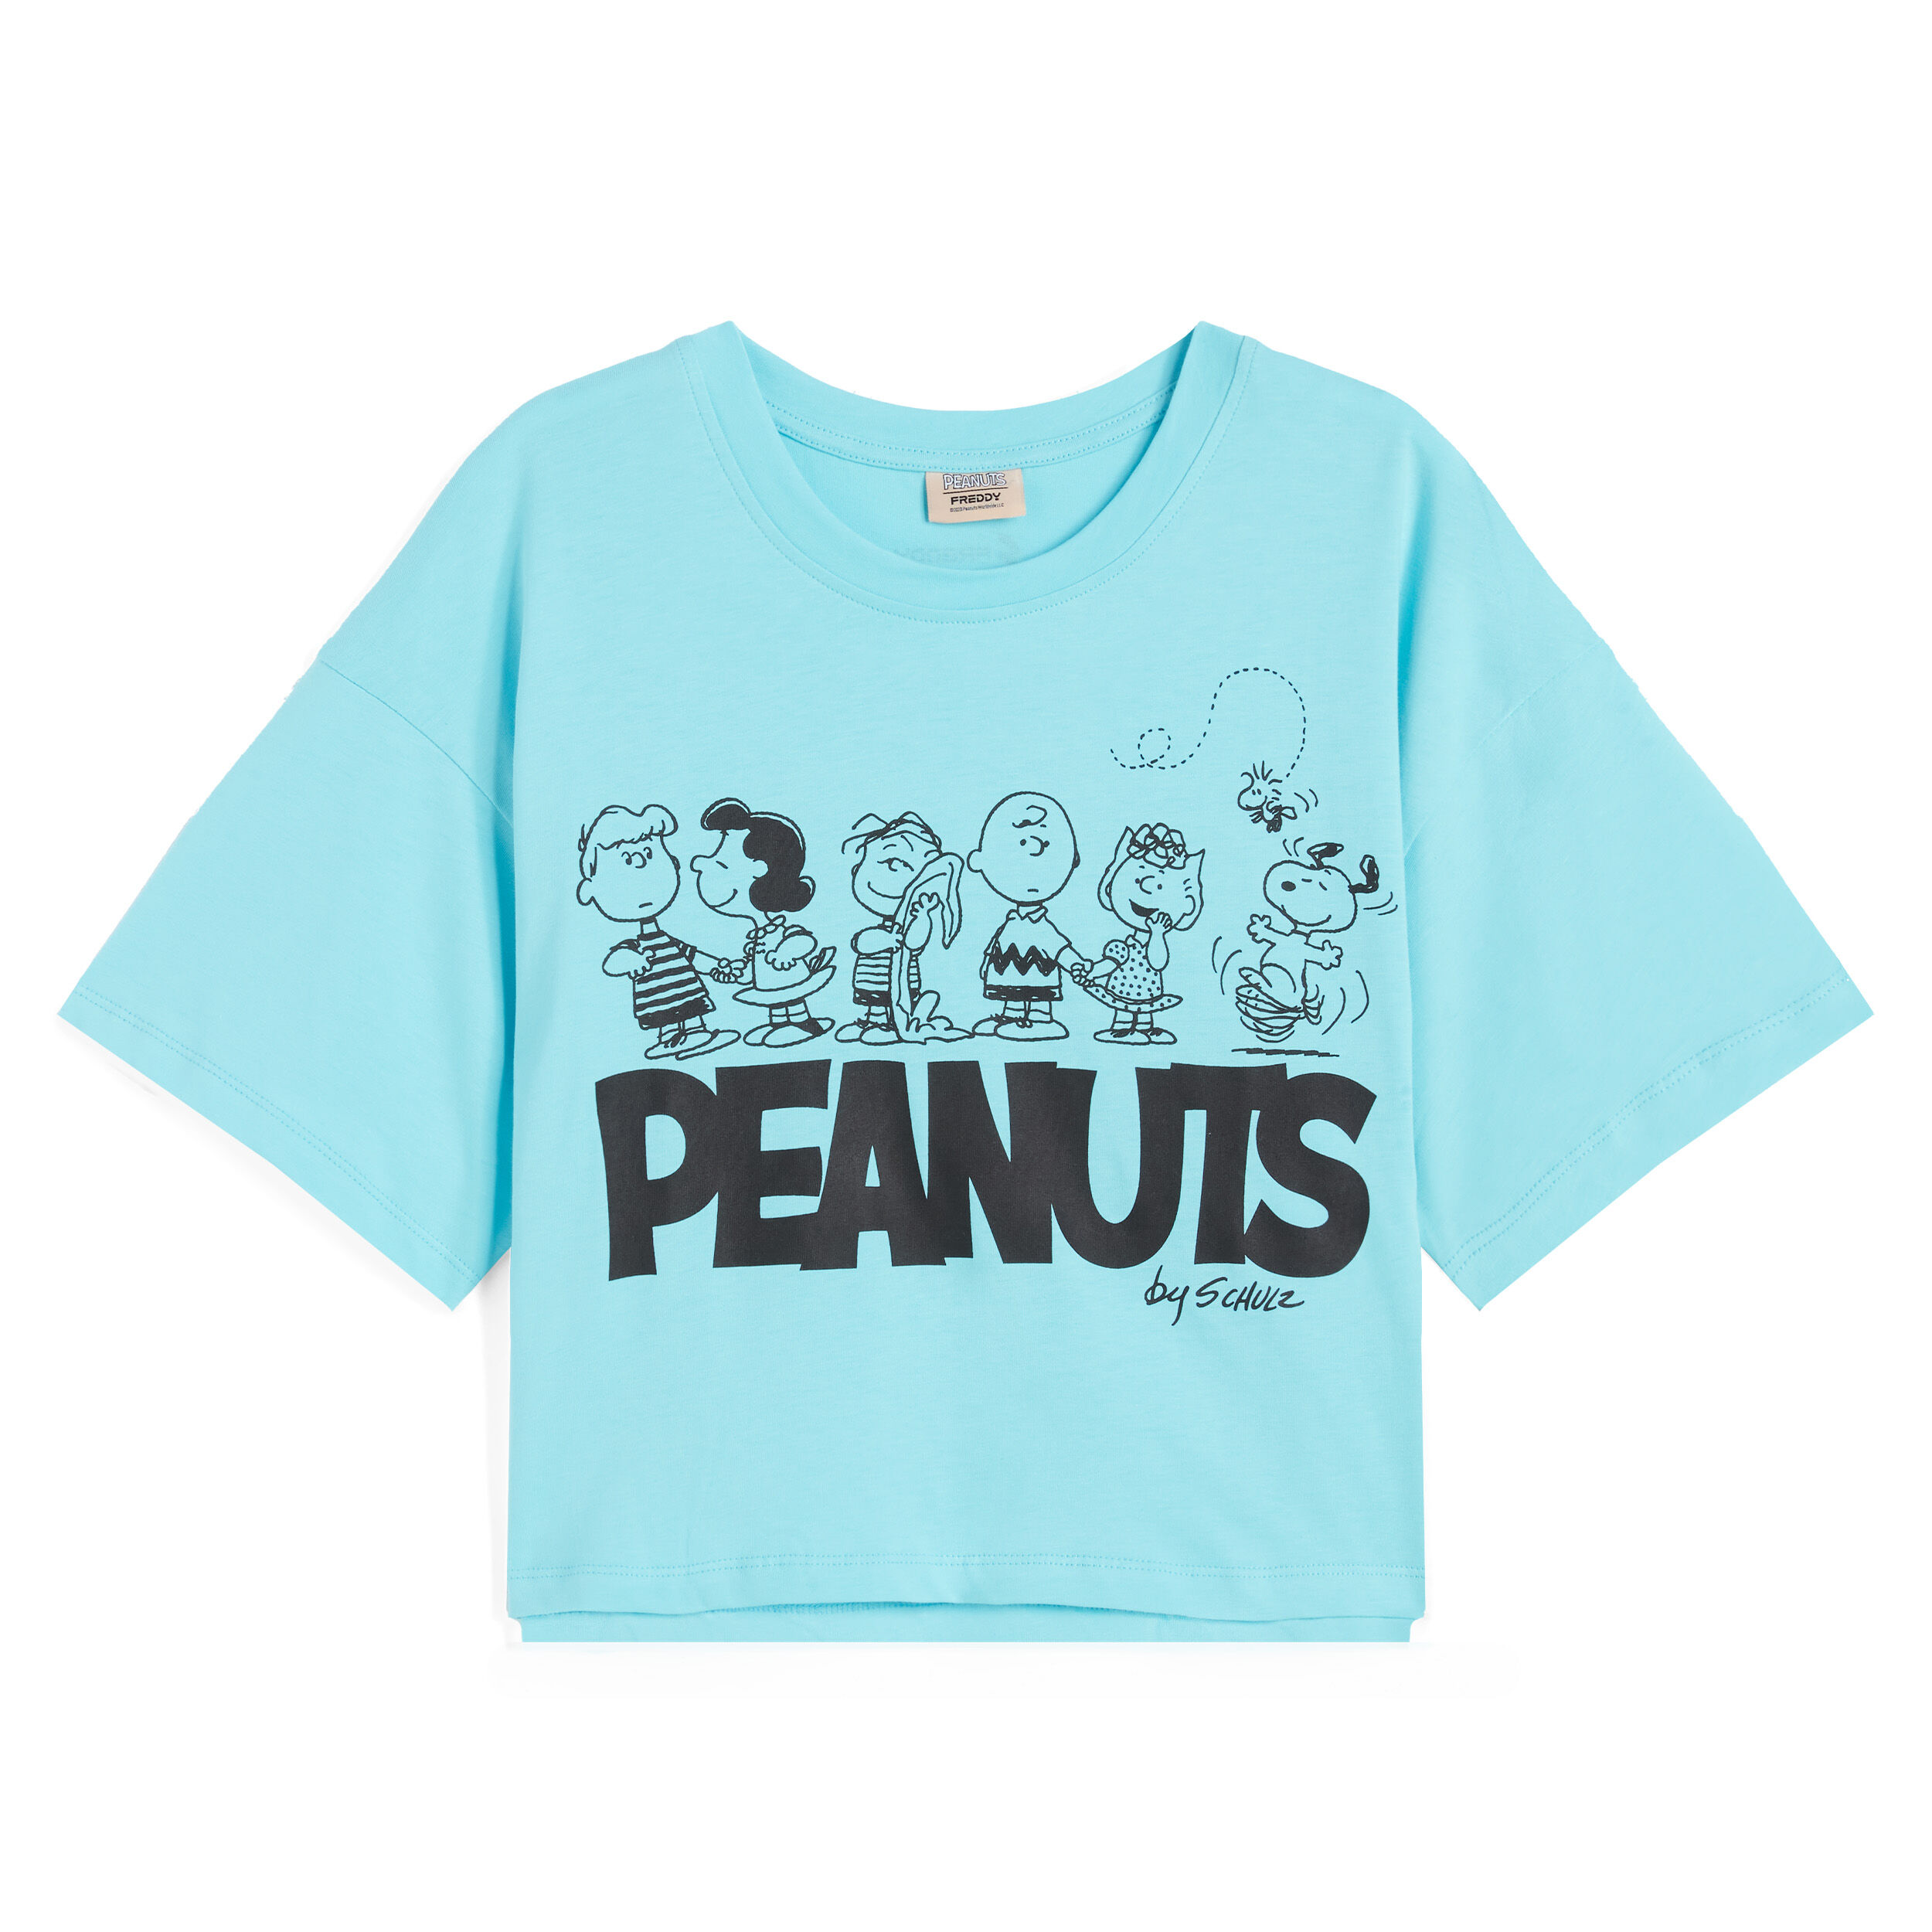 Freddy T-shirt donna corta in jersey con grafica Peanuts Blue Radiance Donna Large